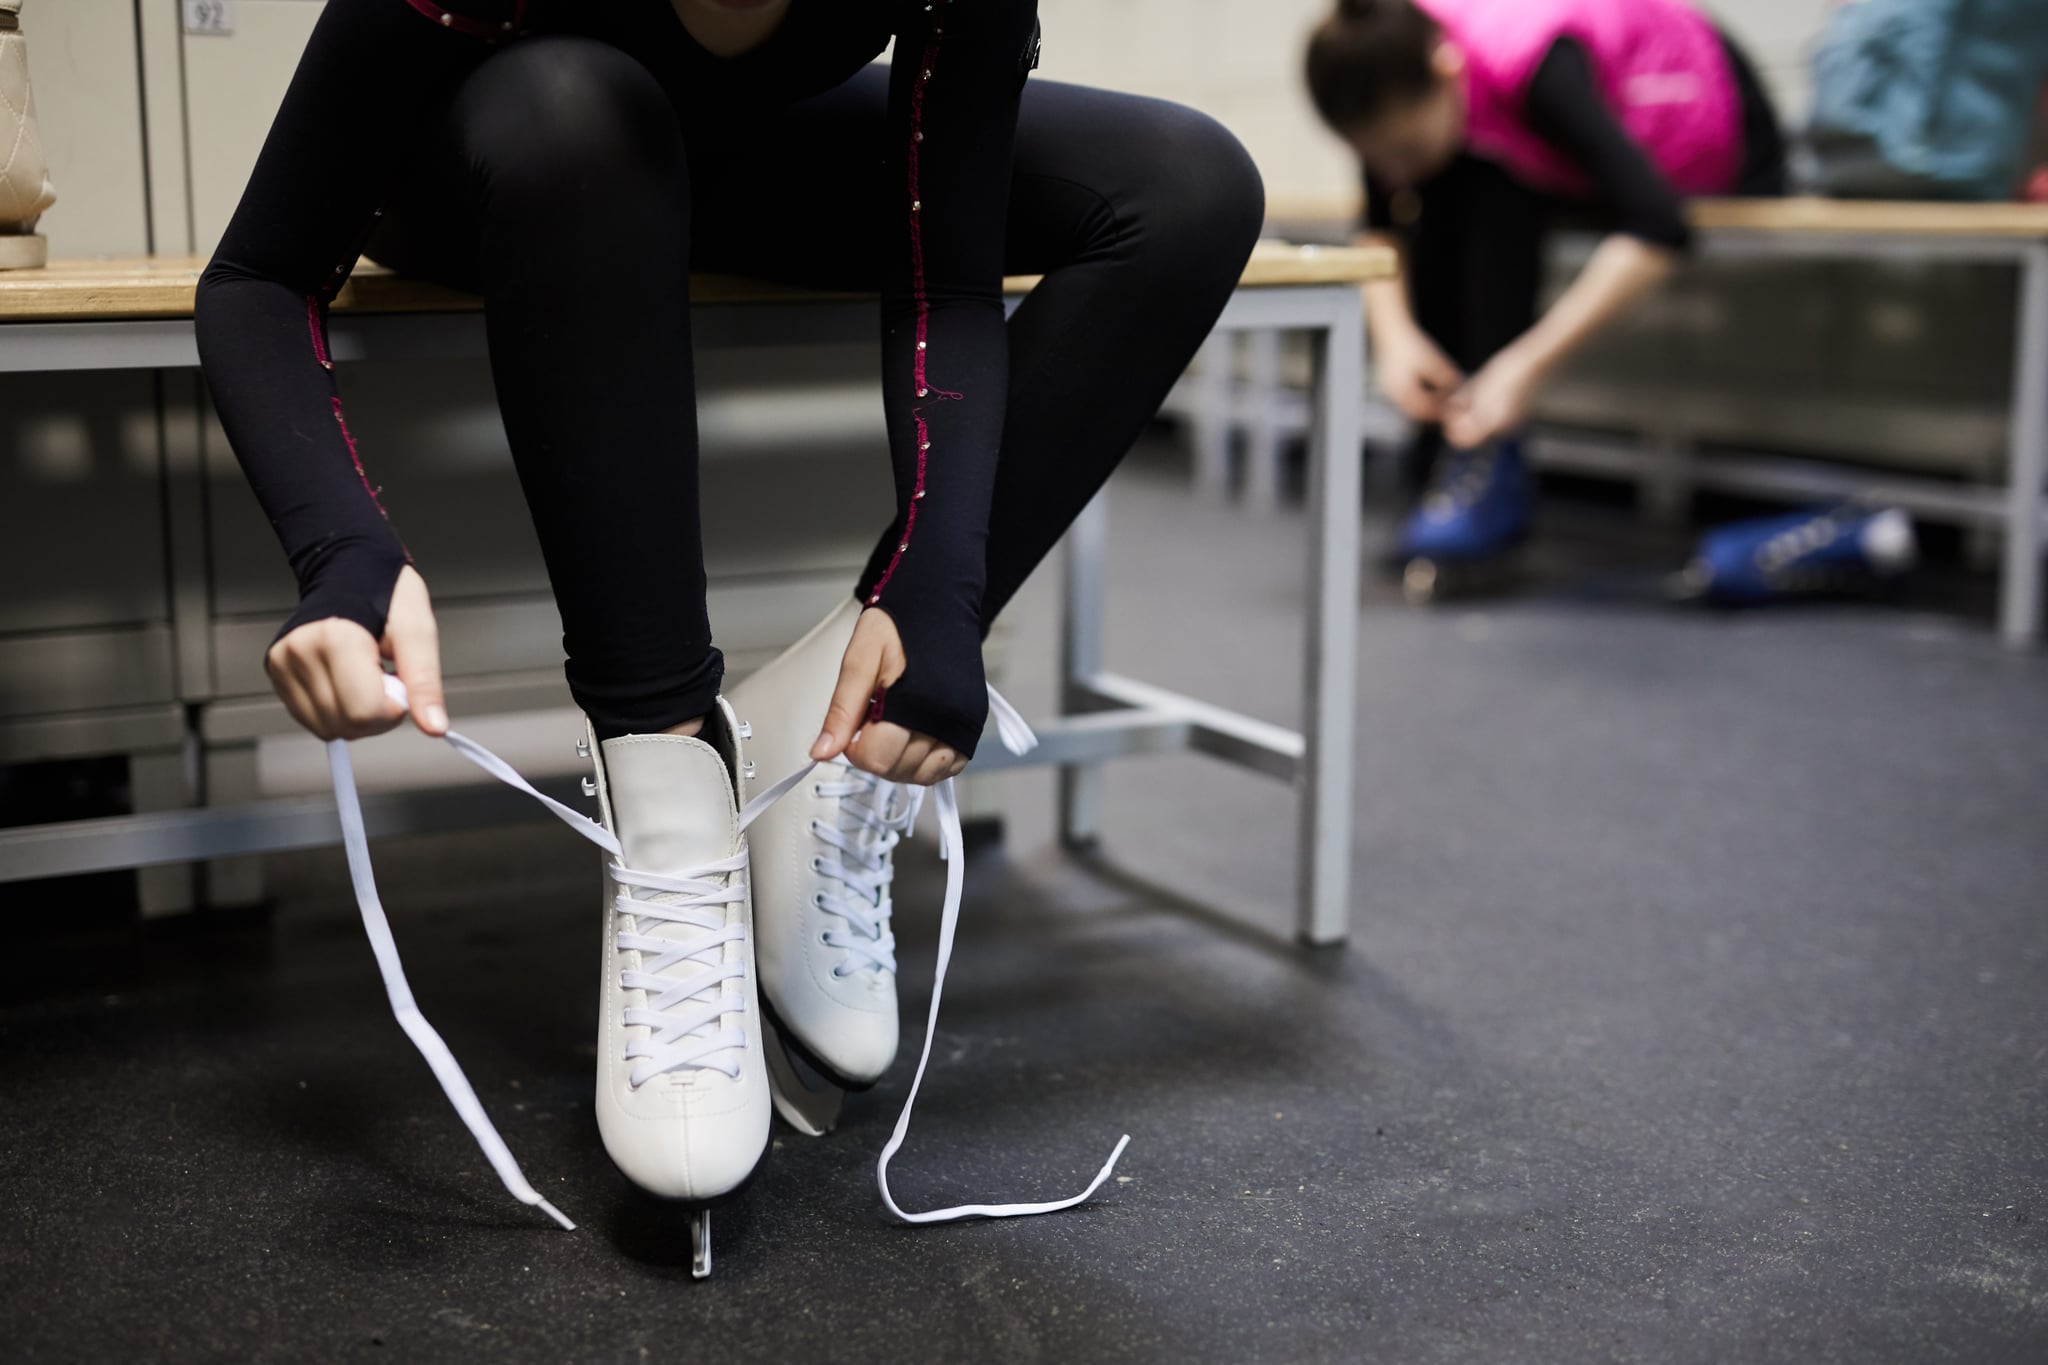 Portrait of unrecognizable girl tying skating shoe in dressing room before practice, copy space